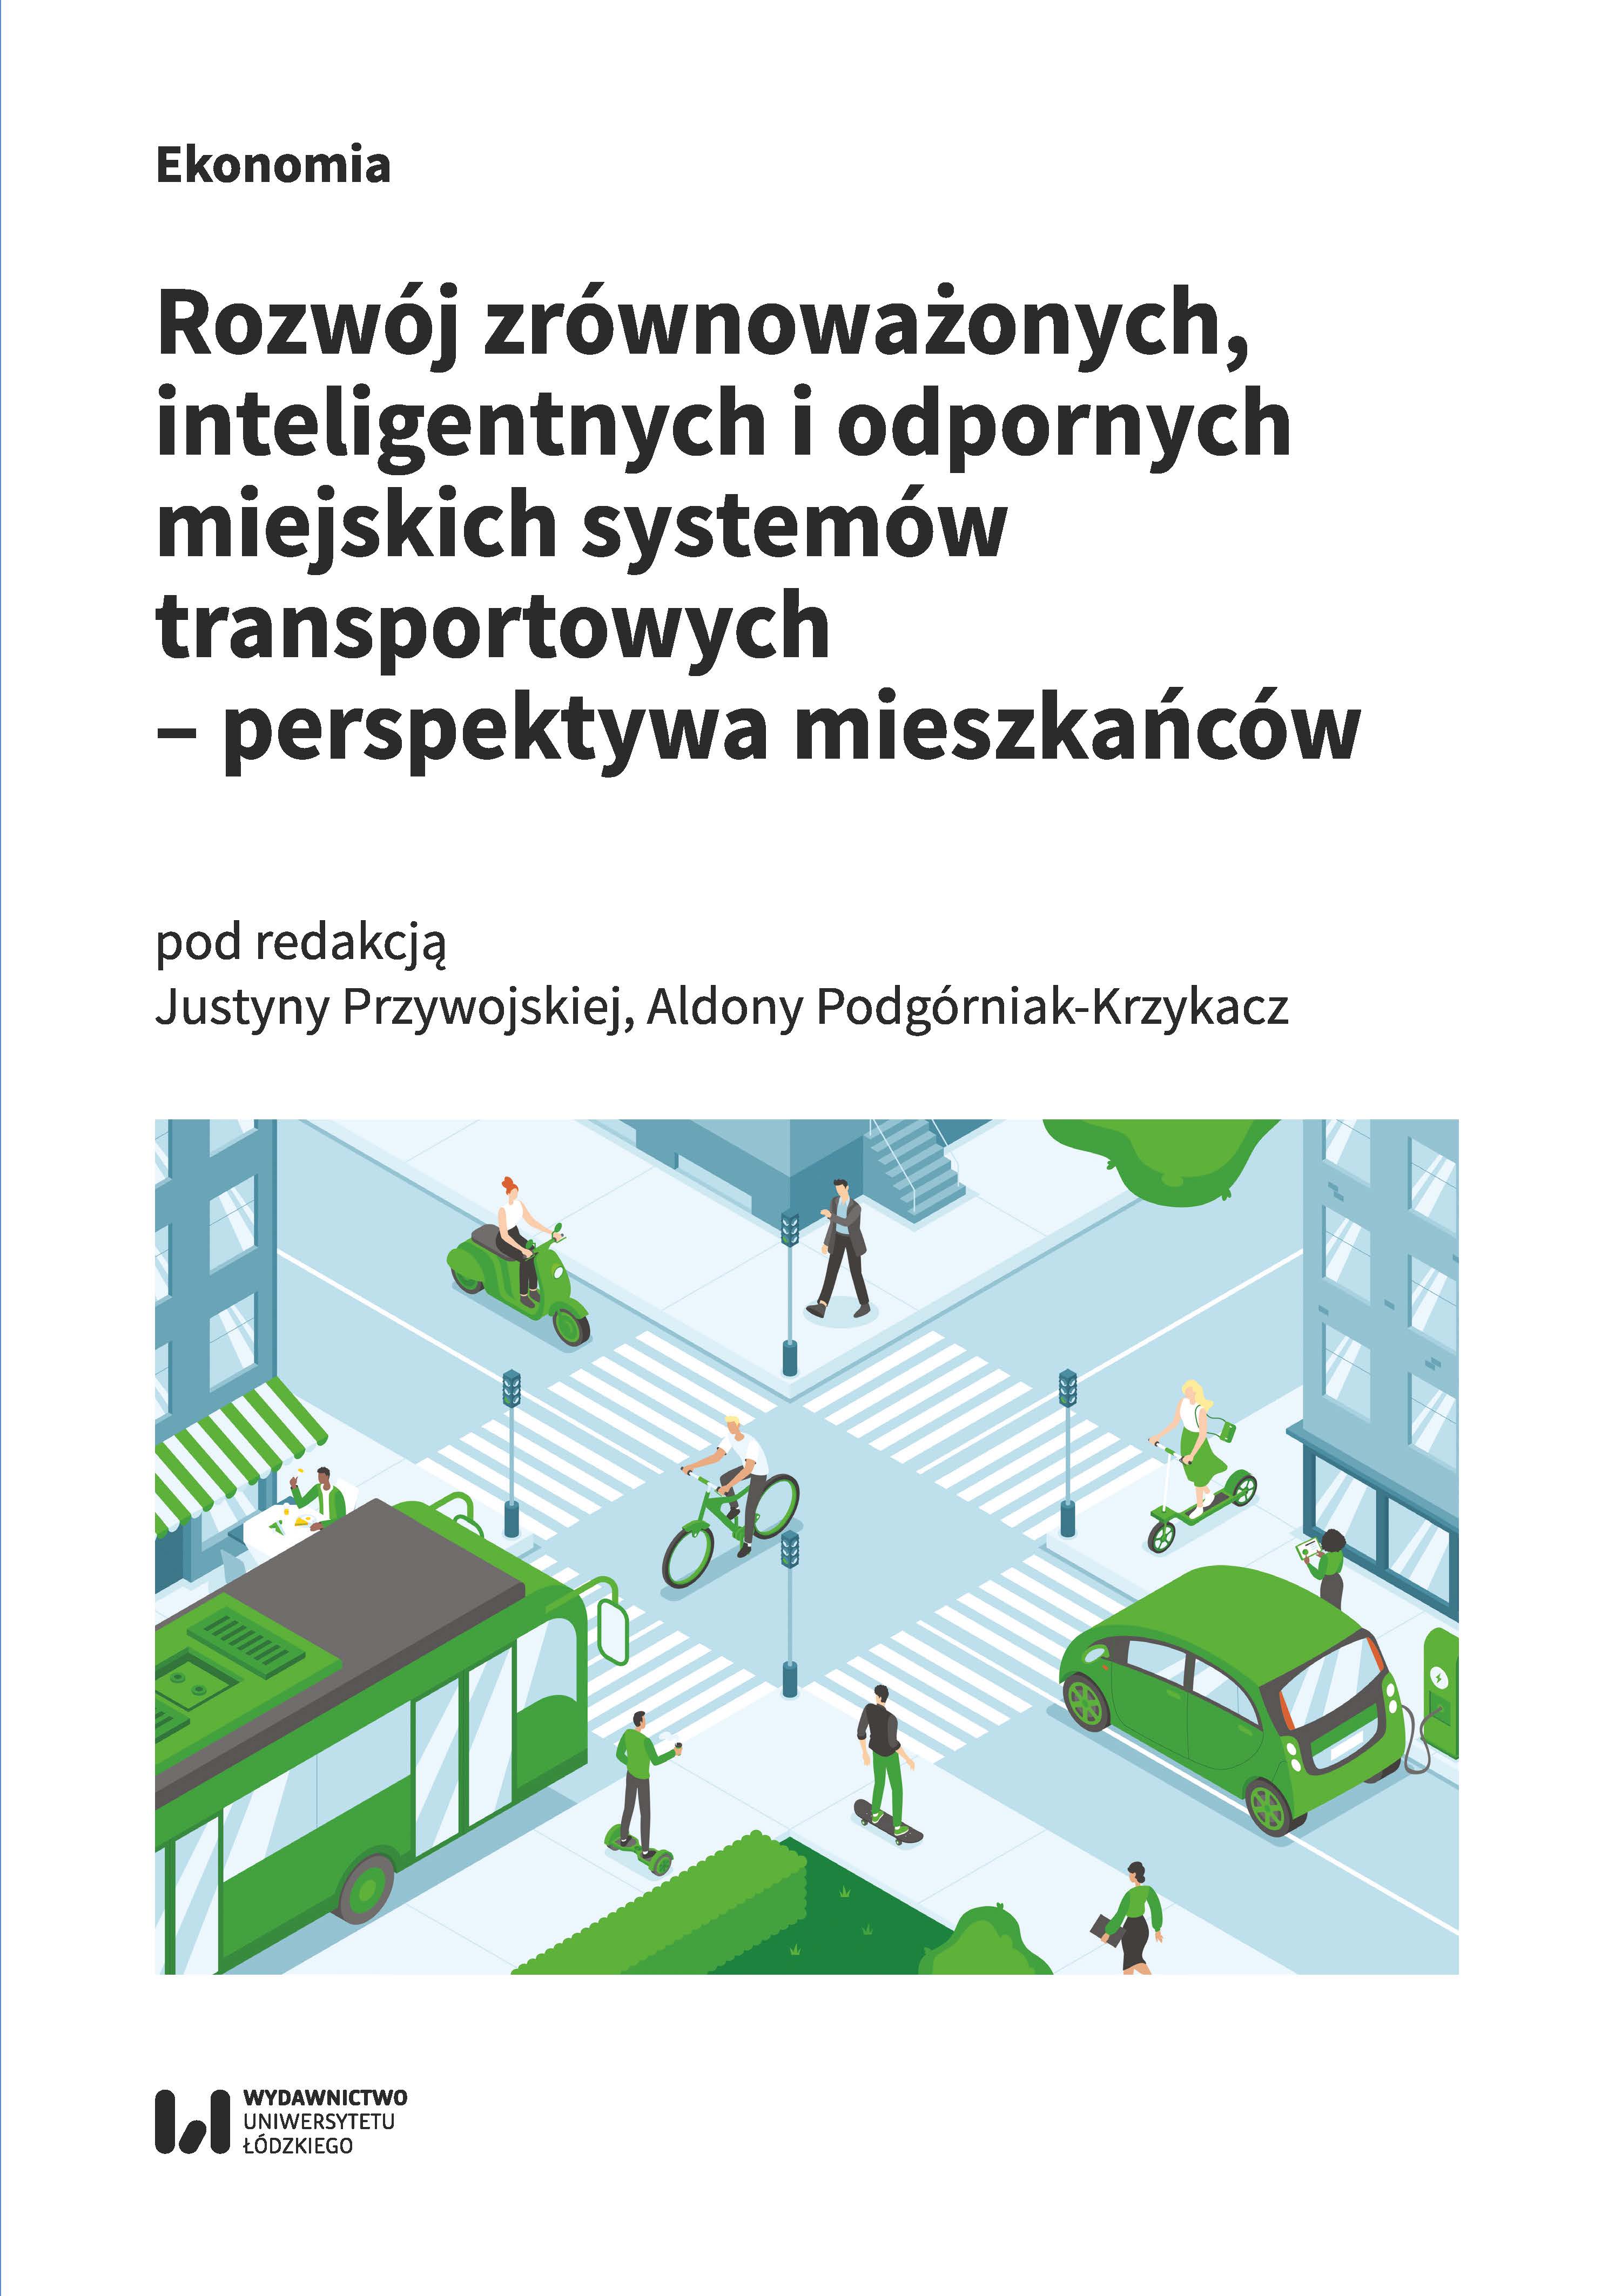 Developing Sustainable, Smart and Resilient Urban Transportation Systems - Residents' Perspective Cover Image